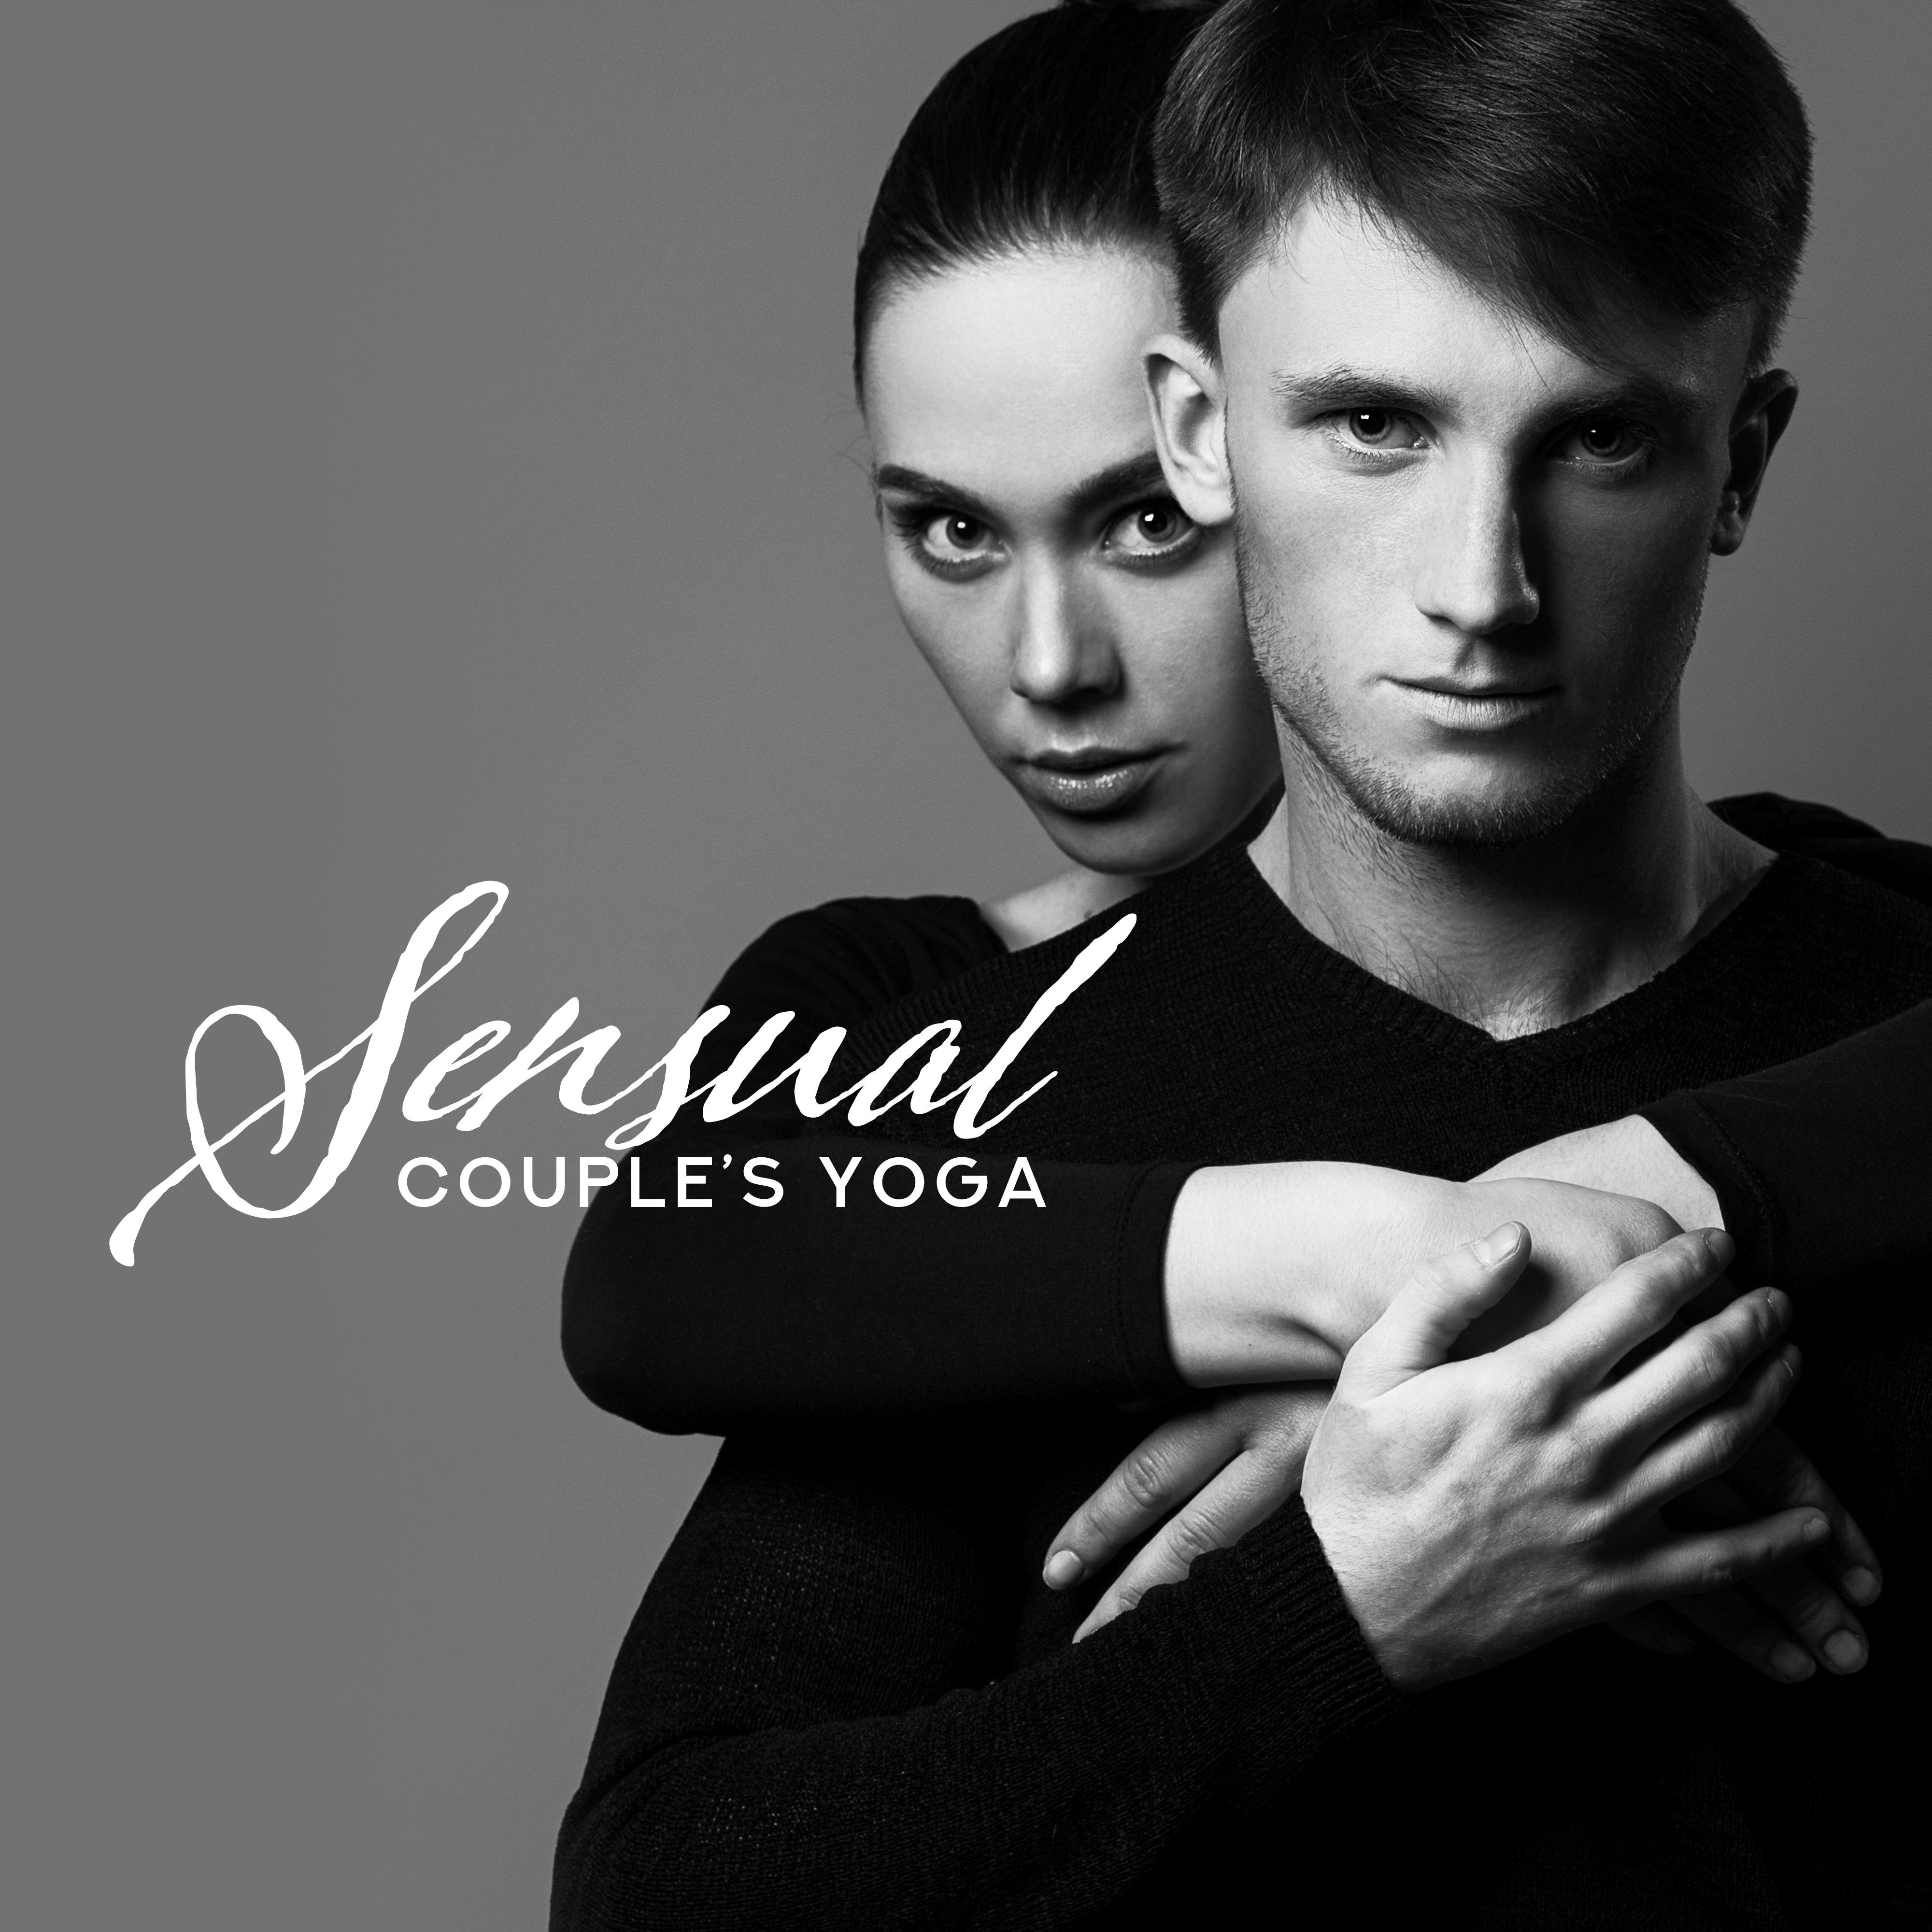 Sensual Couple' s Yoga: 2019 New Age Music for Deep Meditation for Two, Train All Yoga Poses, Tantric Contemplation